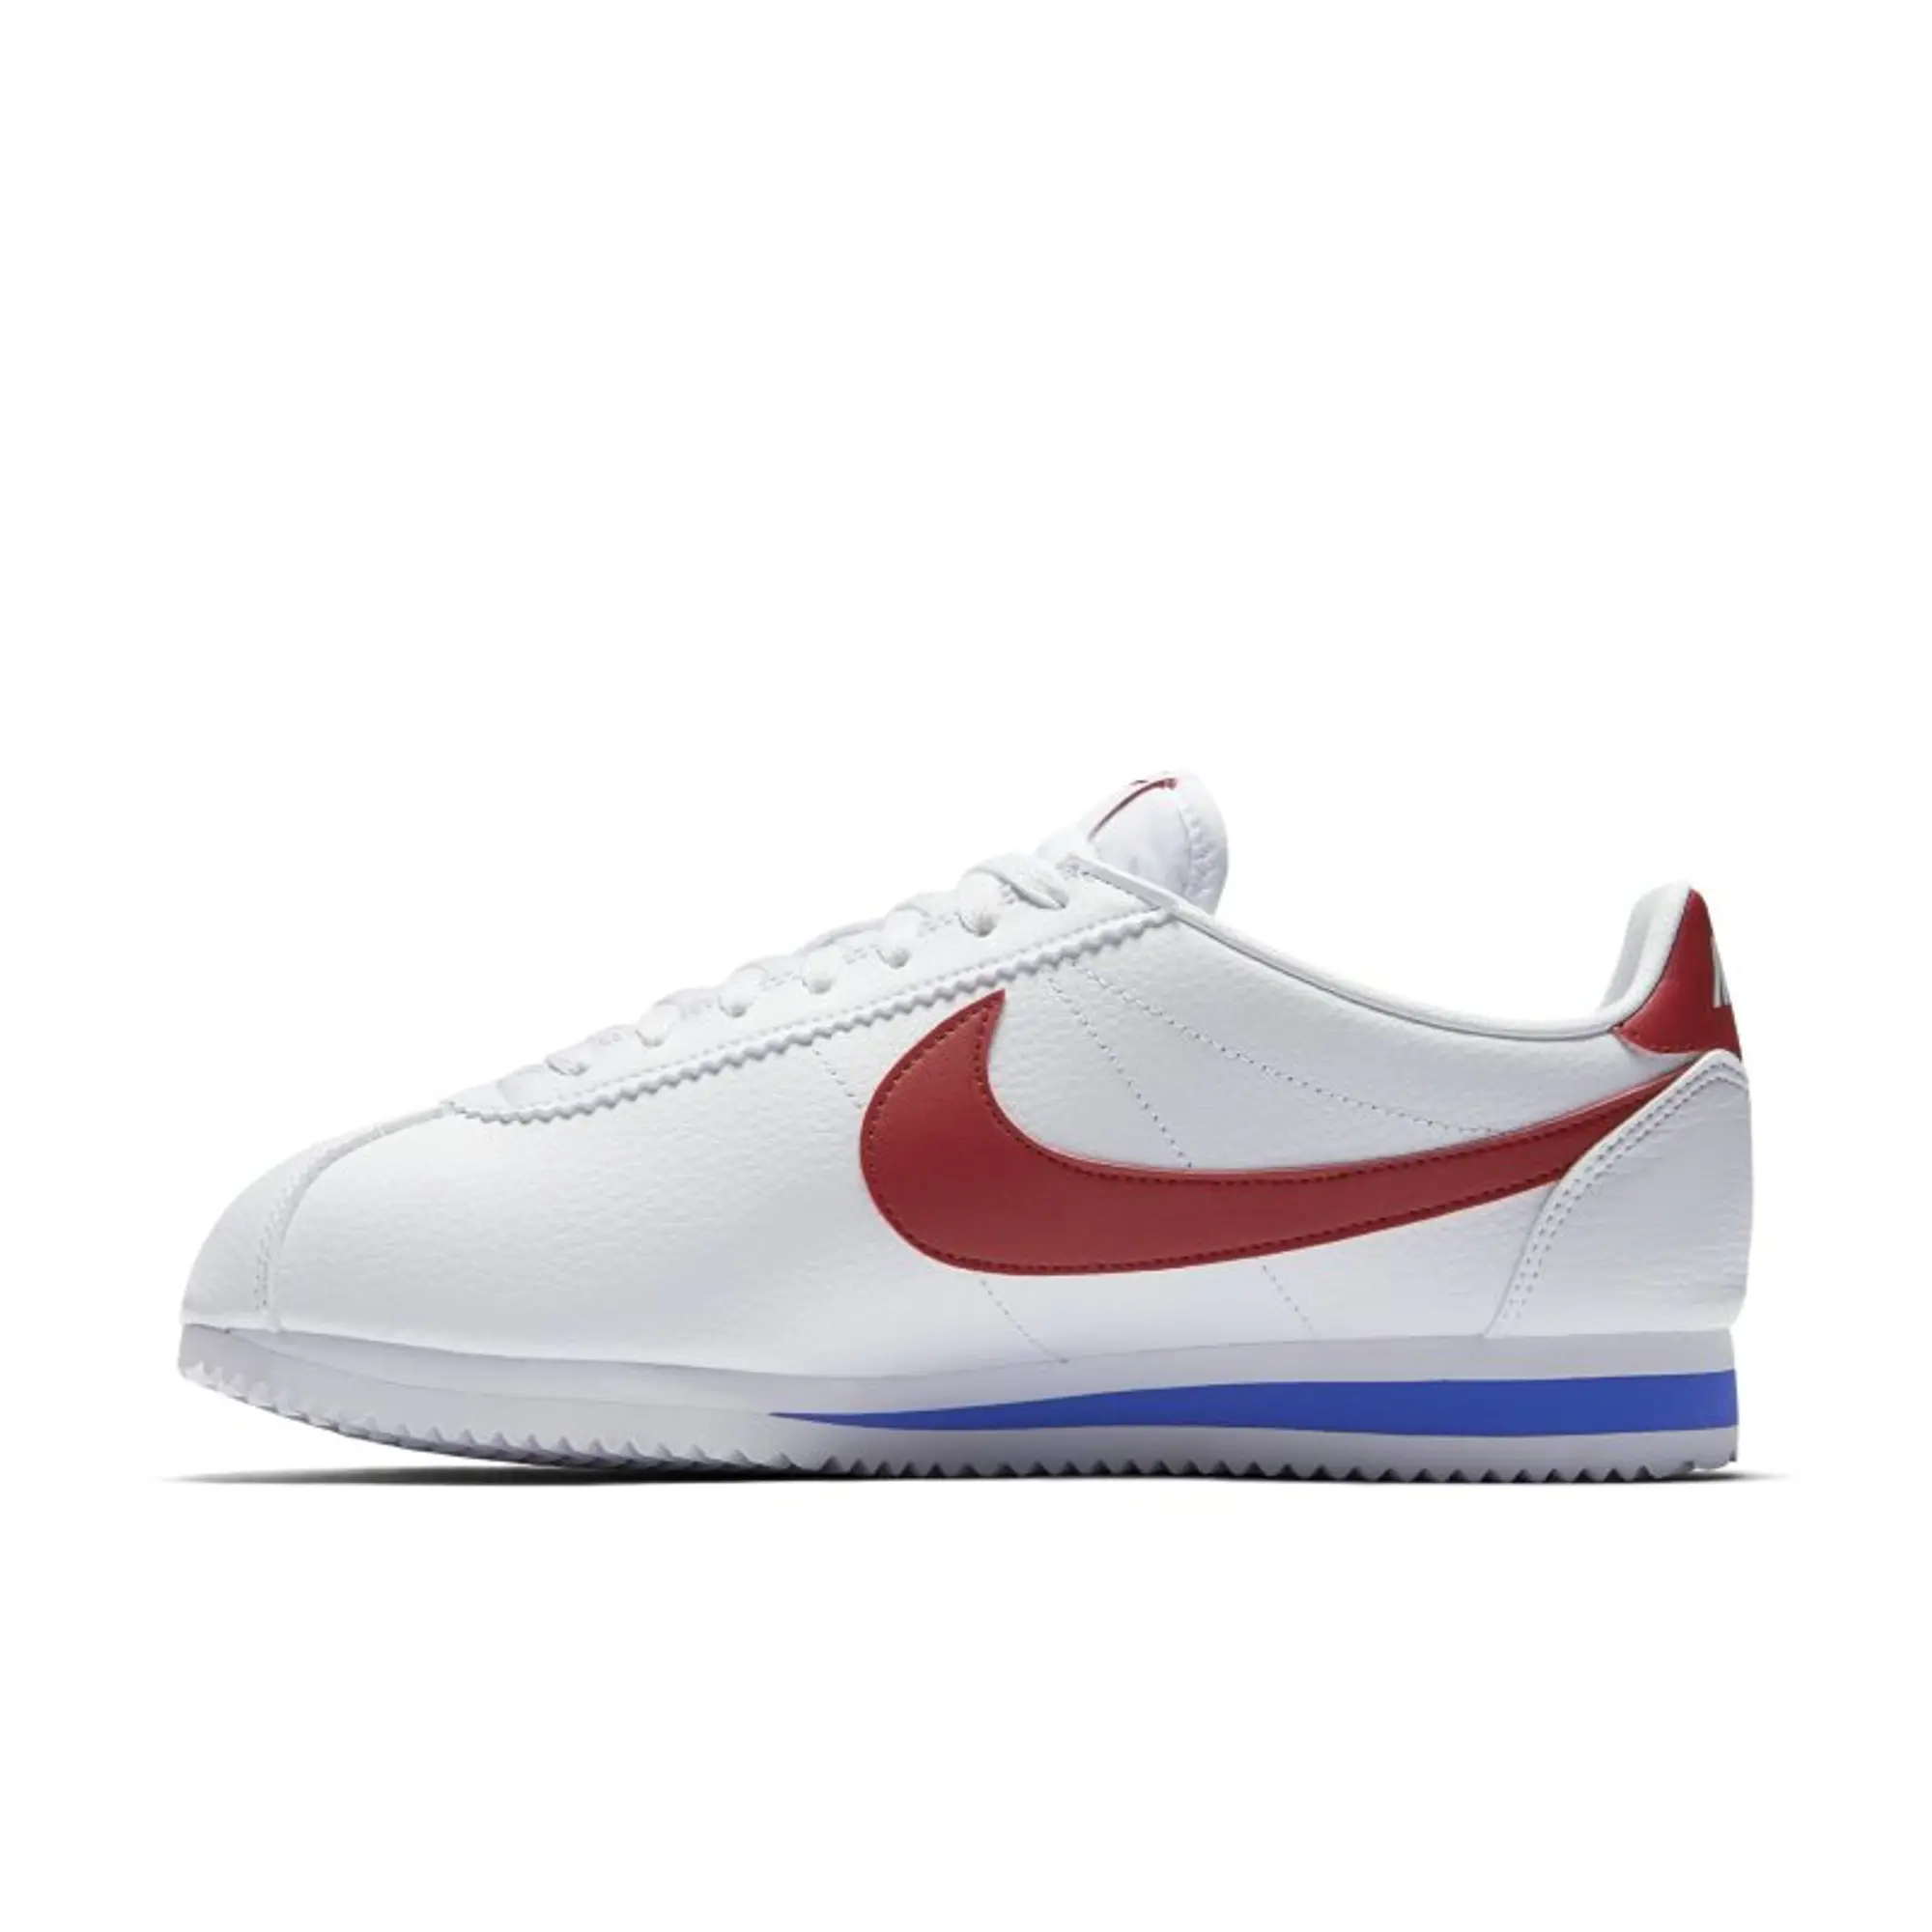 Nike Classic Cortez Leather Shoes